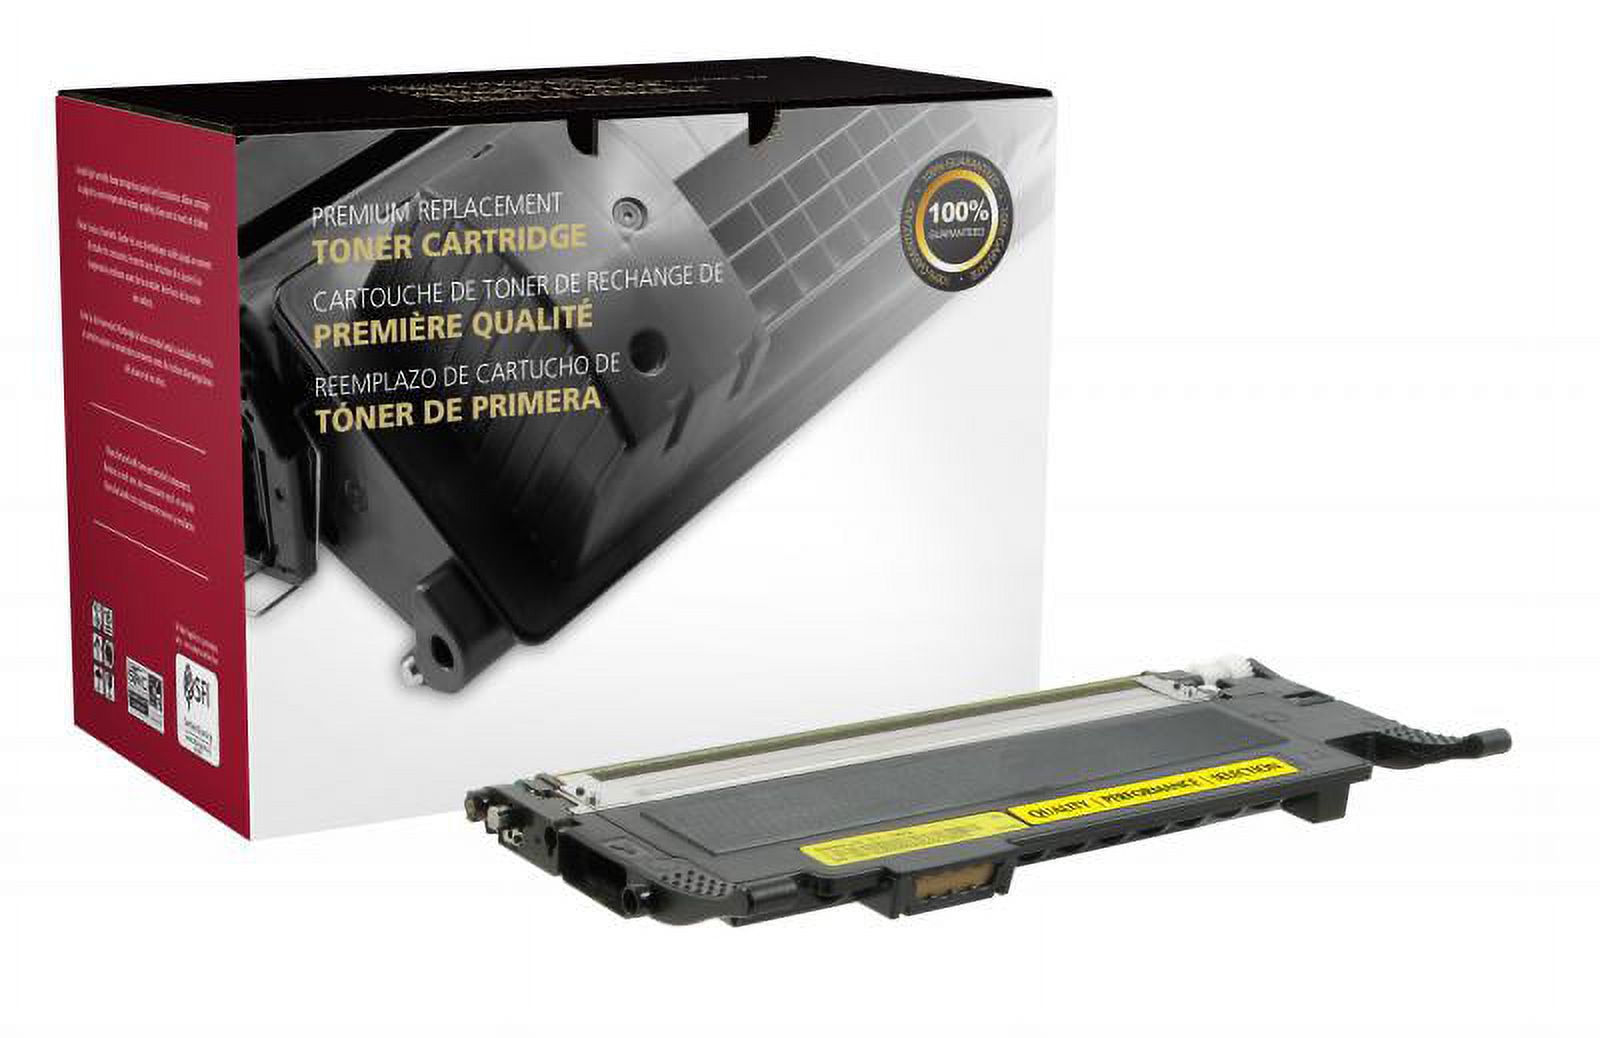 Clover Imaging Remanufactured Yellow Toner Cartridge for Samsung CLT-Y407S - image 1 of 2